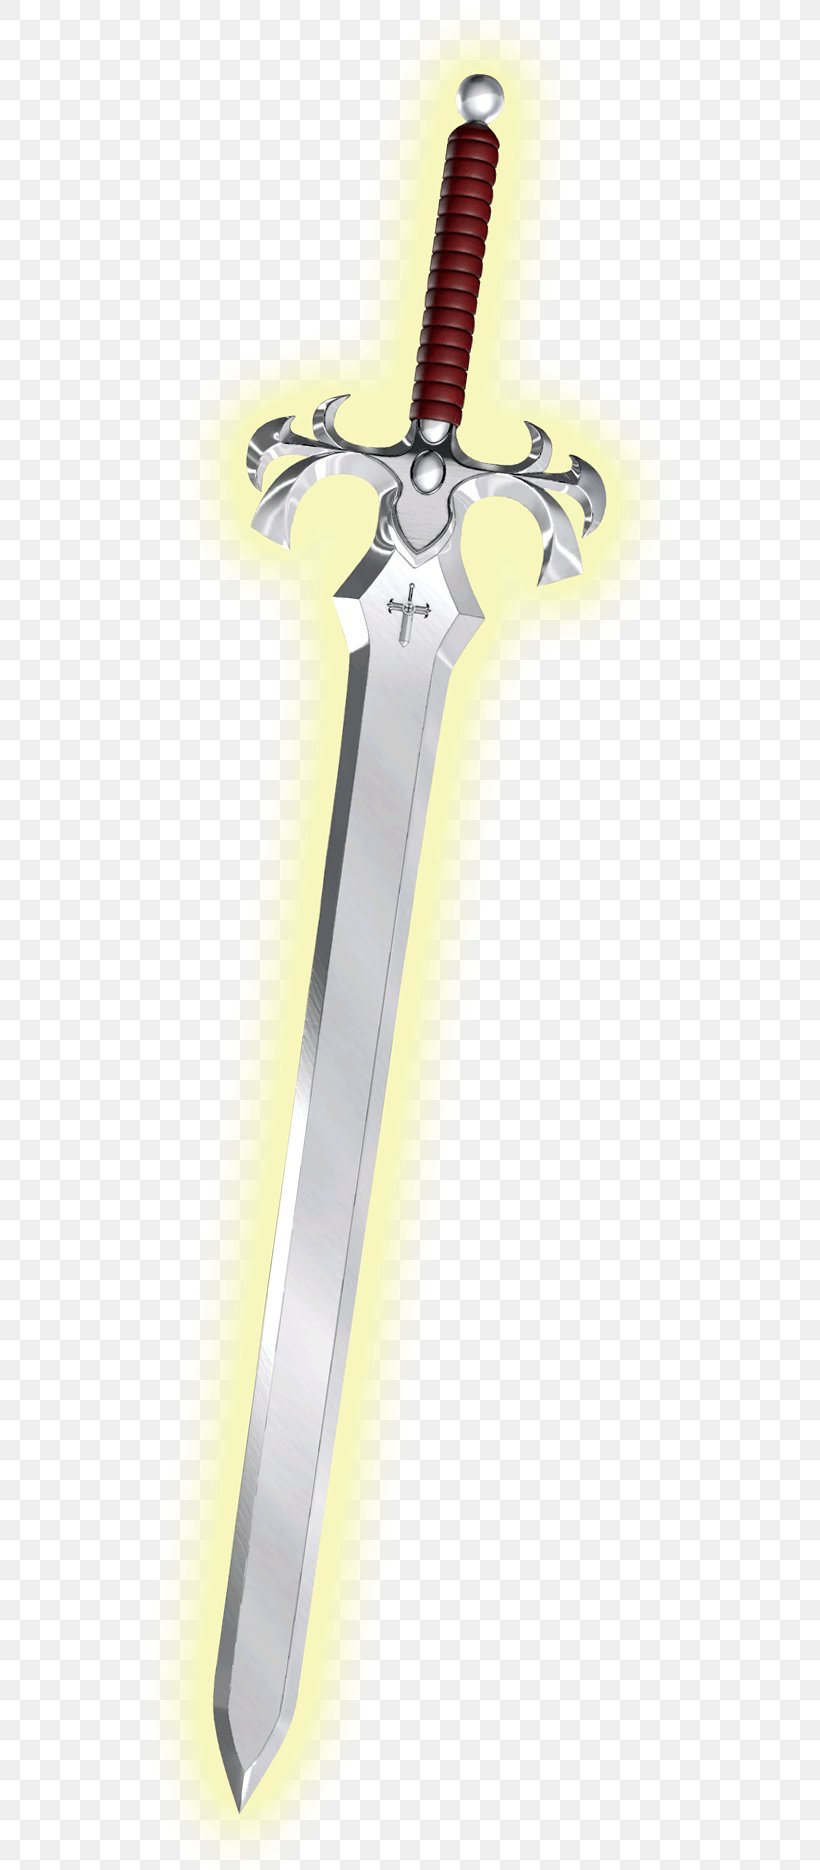 Weapon Sword Dagger Sabre, PNG, 543x1870px, Weapon, Cold Weapon, Cross, Dagger, Sabre Download Free